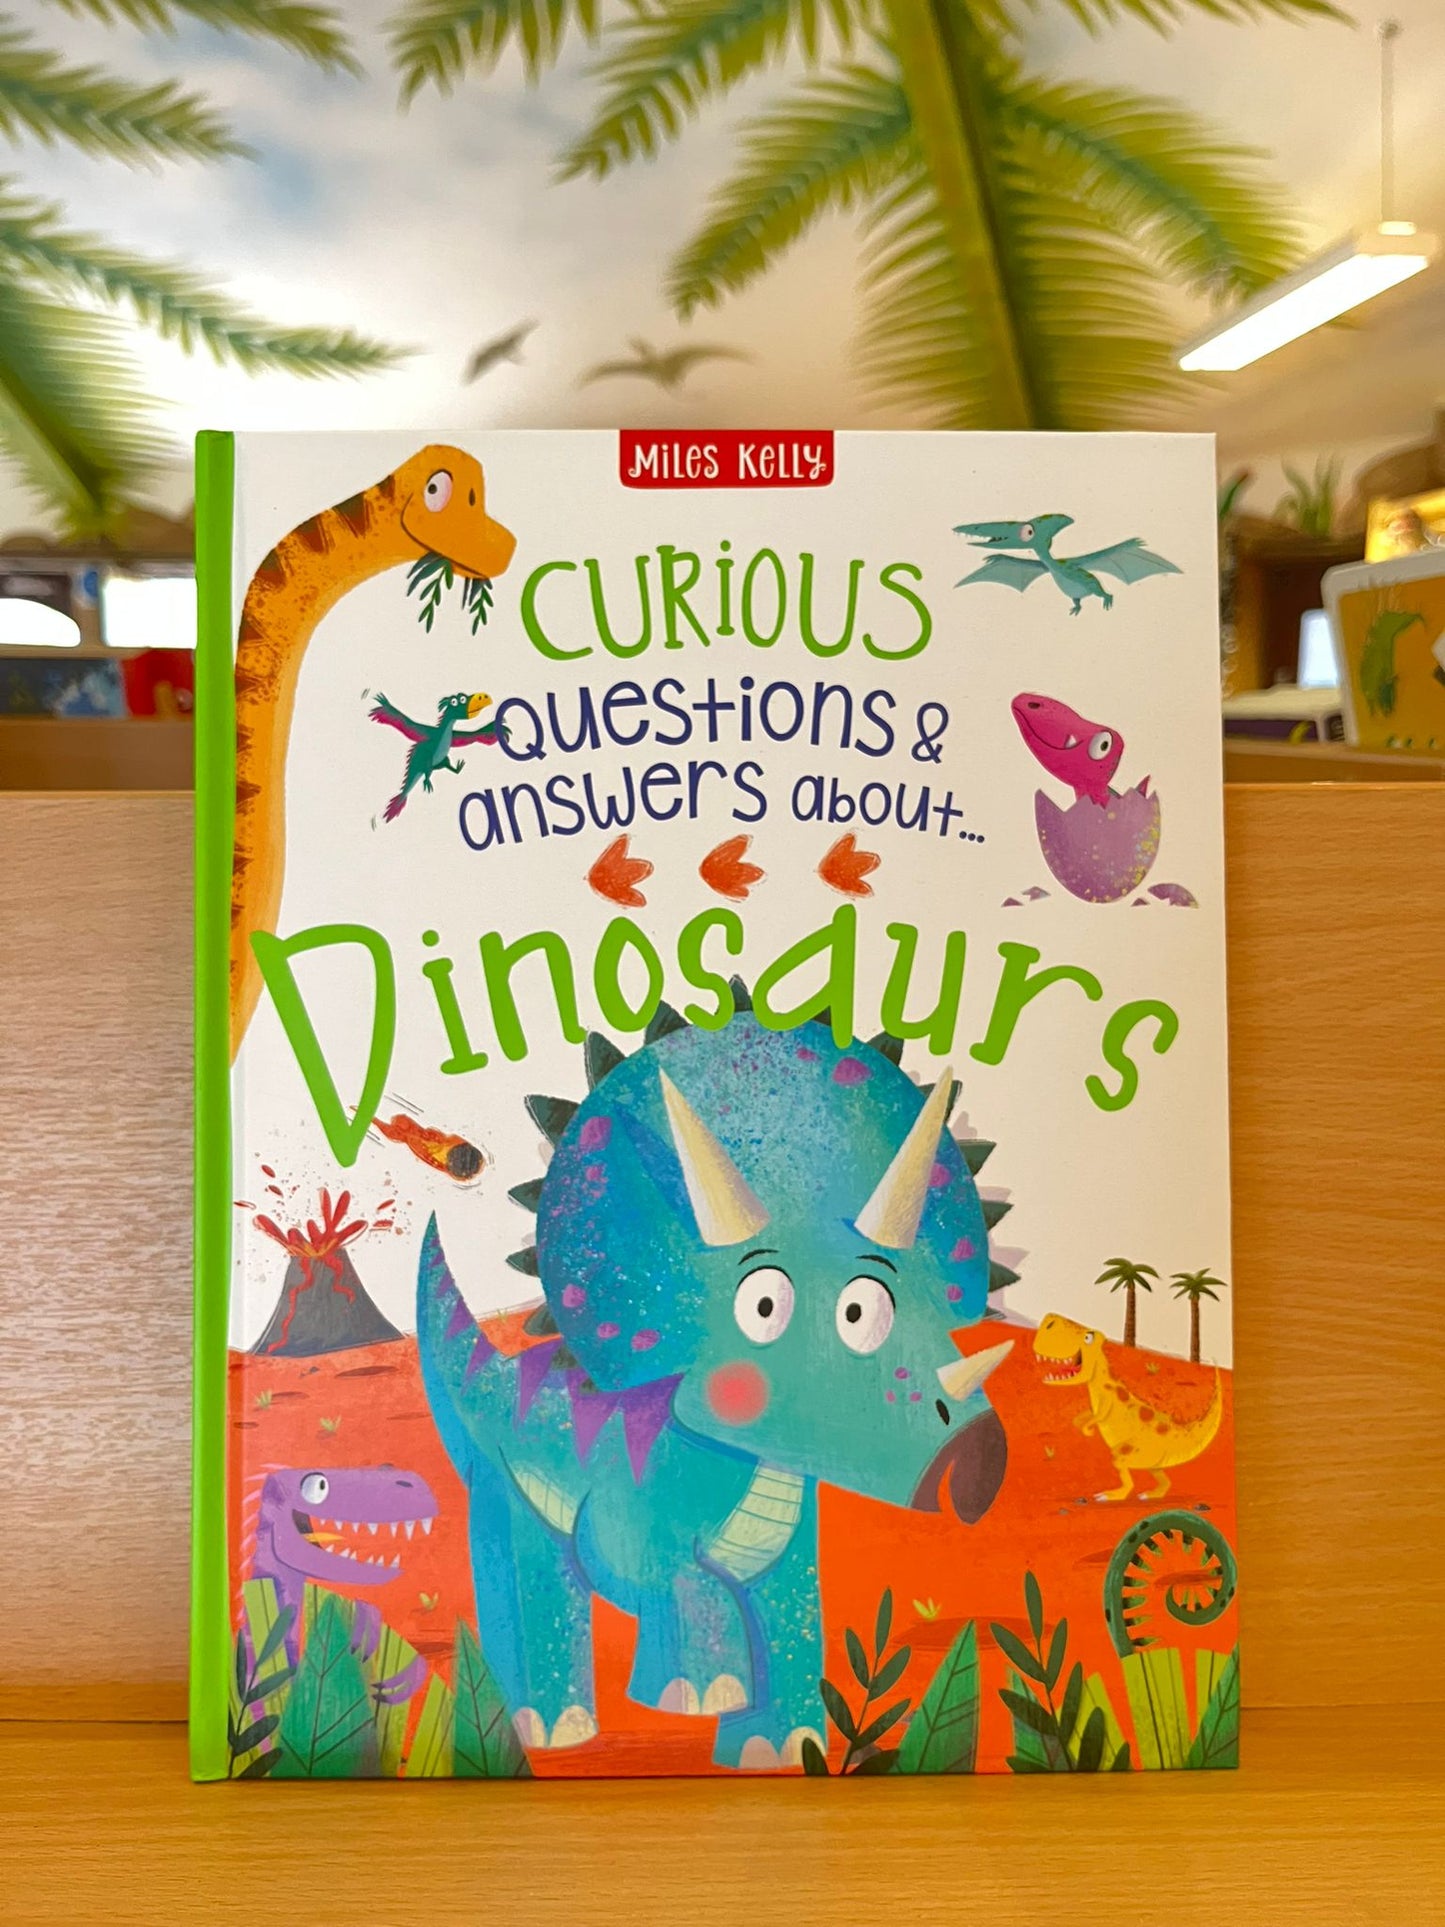 Curious Questions and Answers about.. Dinosaurs